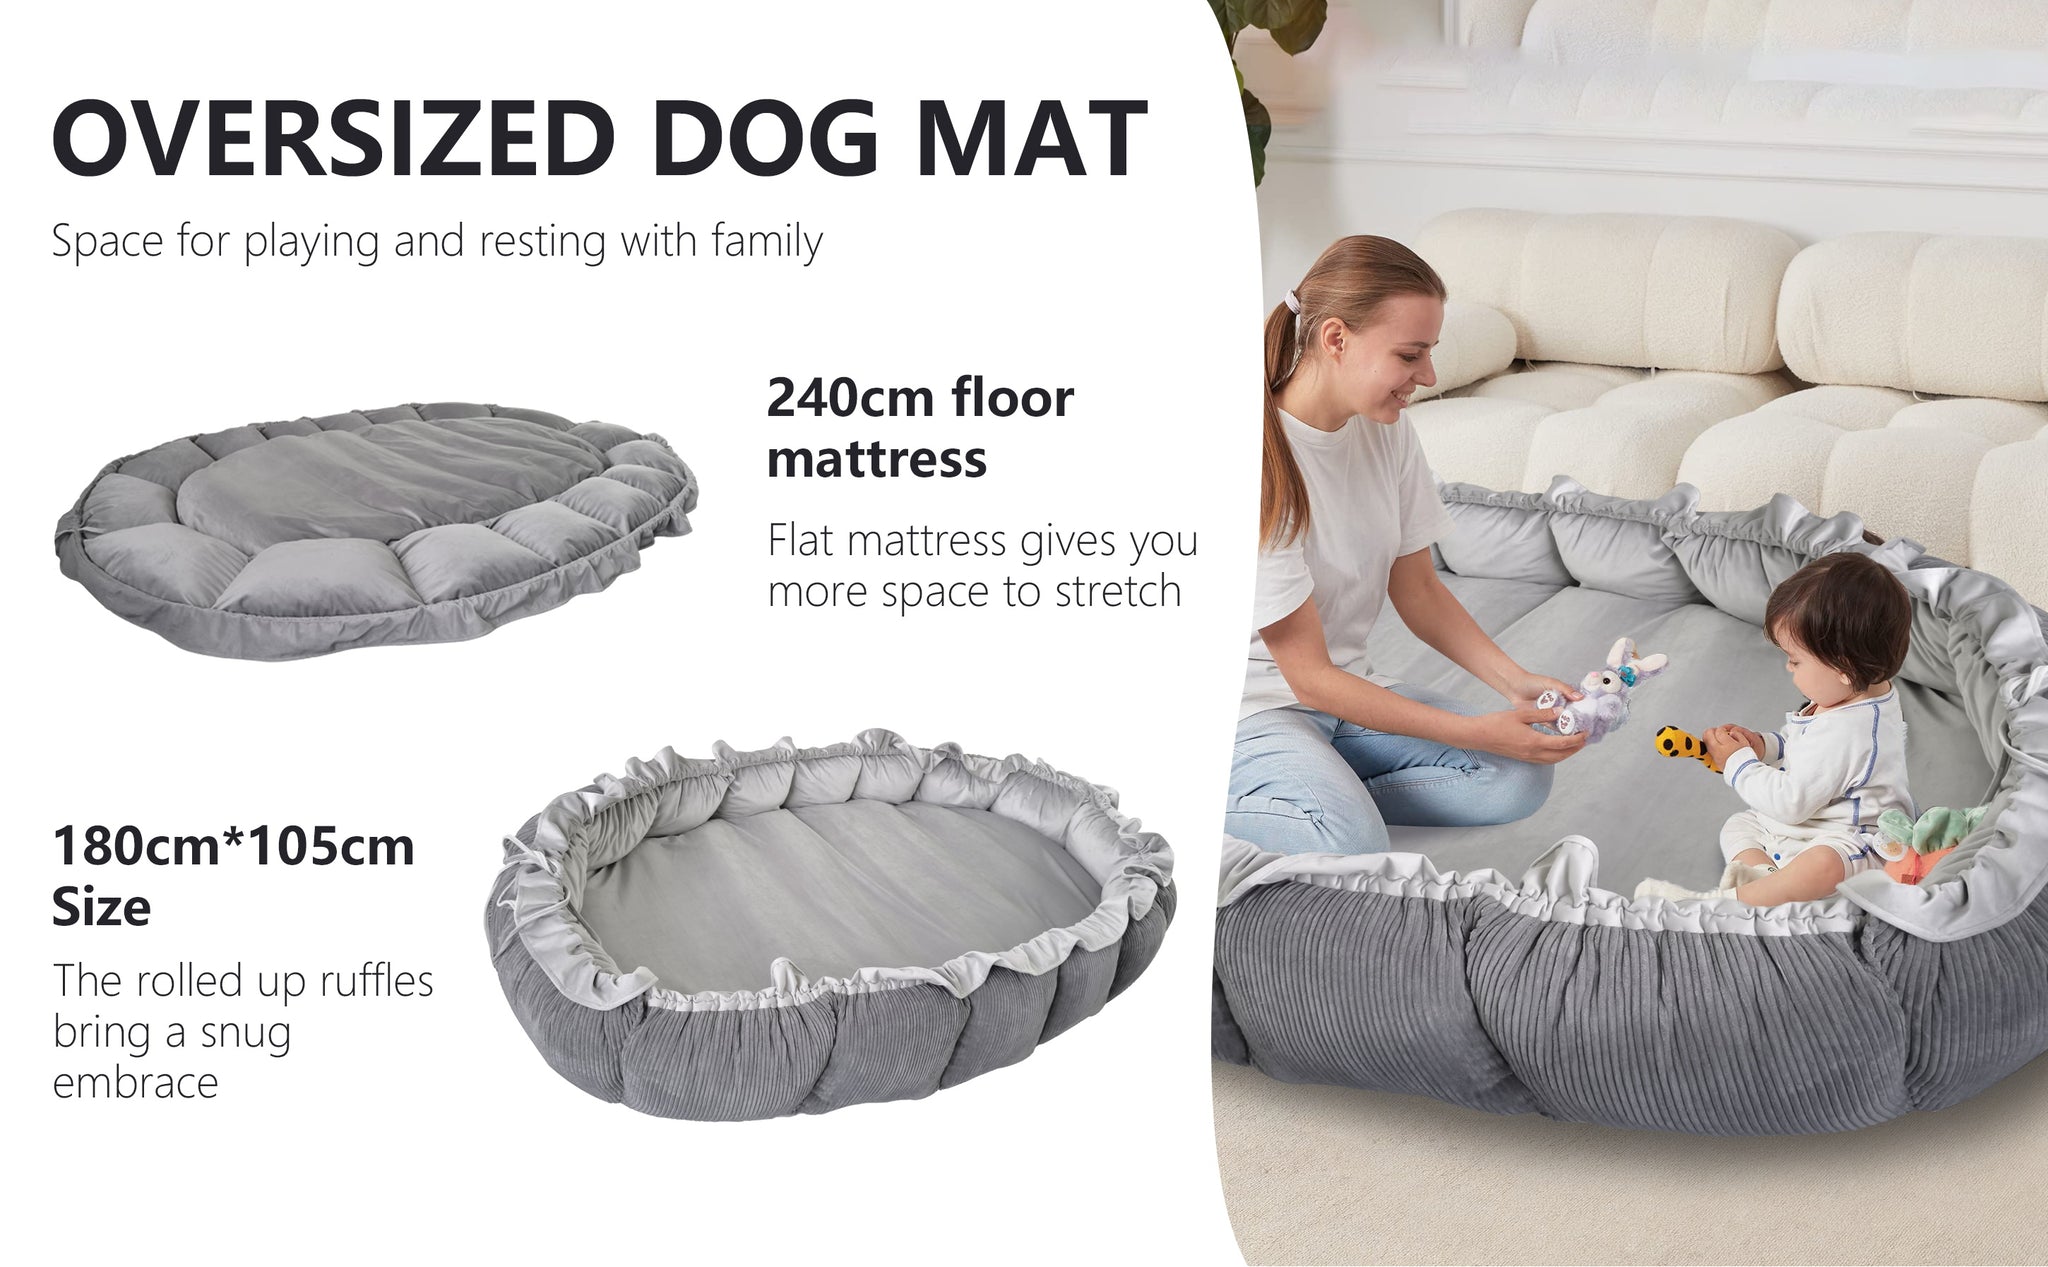 The Humanoid Dog Bed Futon is the perfect companion for your furry friend. It's up to 4 inches thick, with dimensions of 94 x 65 inches, making it a comfortable spot for even larger breeds. Plus, its kid-friendly design makes it suitable for the whole family.